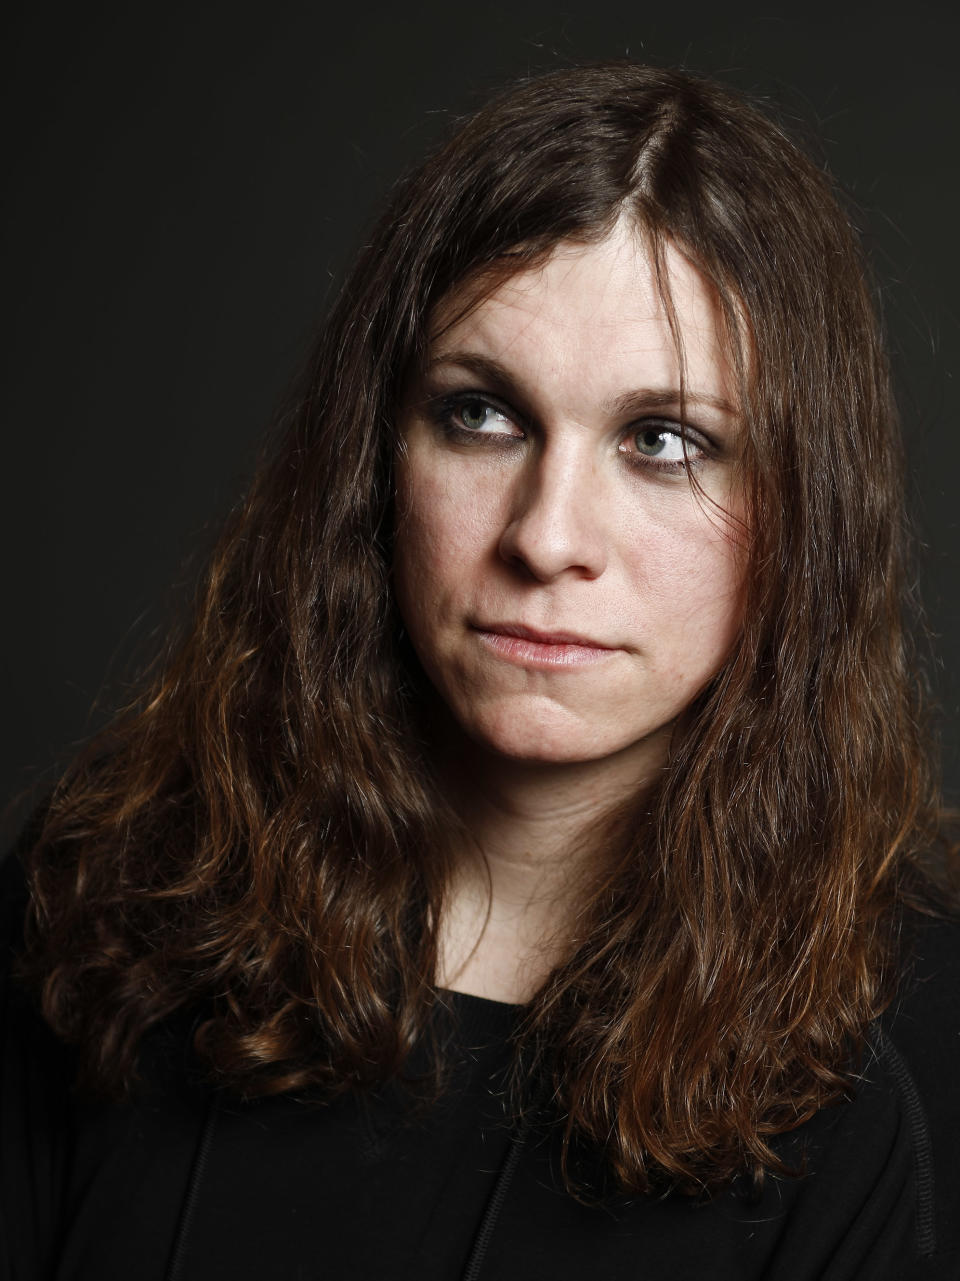 This Jan. 10, 2014 photo shows Laura Jane Grace, formerly known as Tom Gabel, of the band Against Me!, in New York. Grace, 33, publicly came out as transgender in 2012. She was born Tom Gabel and performed with the Florida-based band since 1997. The group’s latest album, “Transgender Dysphoria Blues,” a concept record about a transgender prostitute, marked a chart high for the band when it reached No. 23 on the Billboard 200 albums chart in late January. (Photo by Brian Ach/Invision/AP)